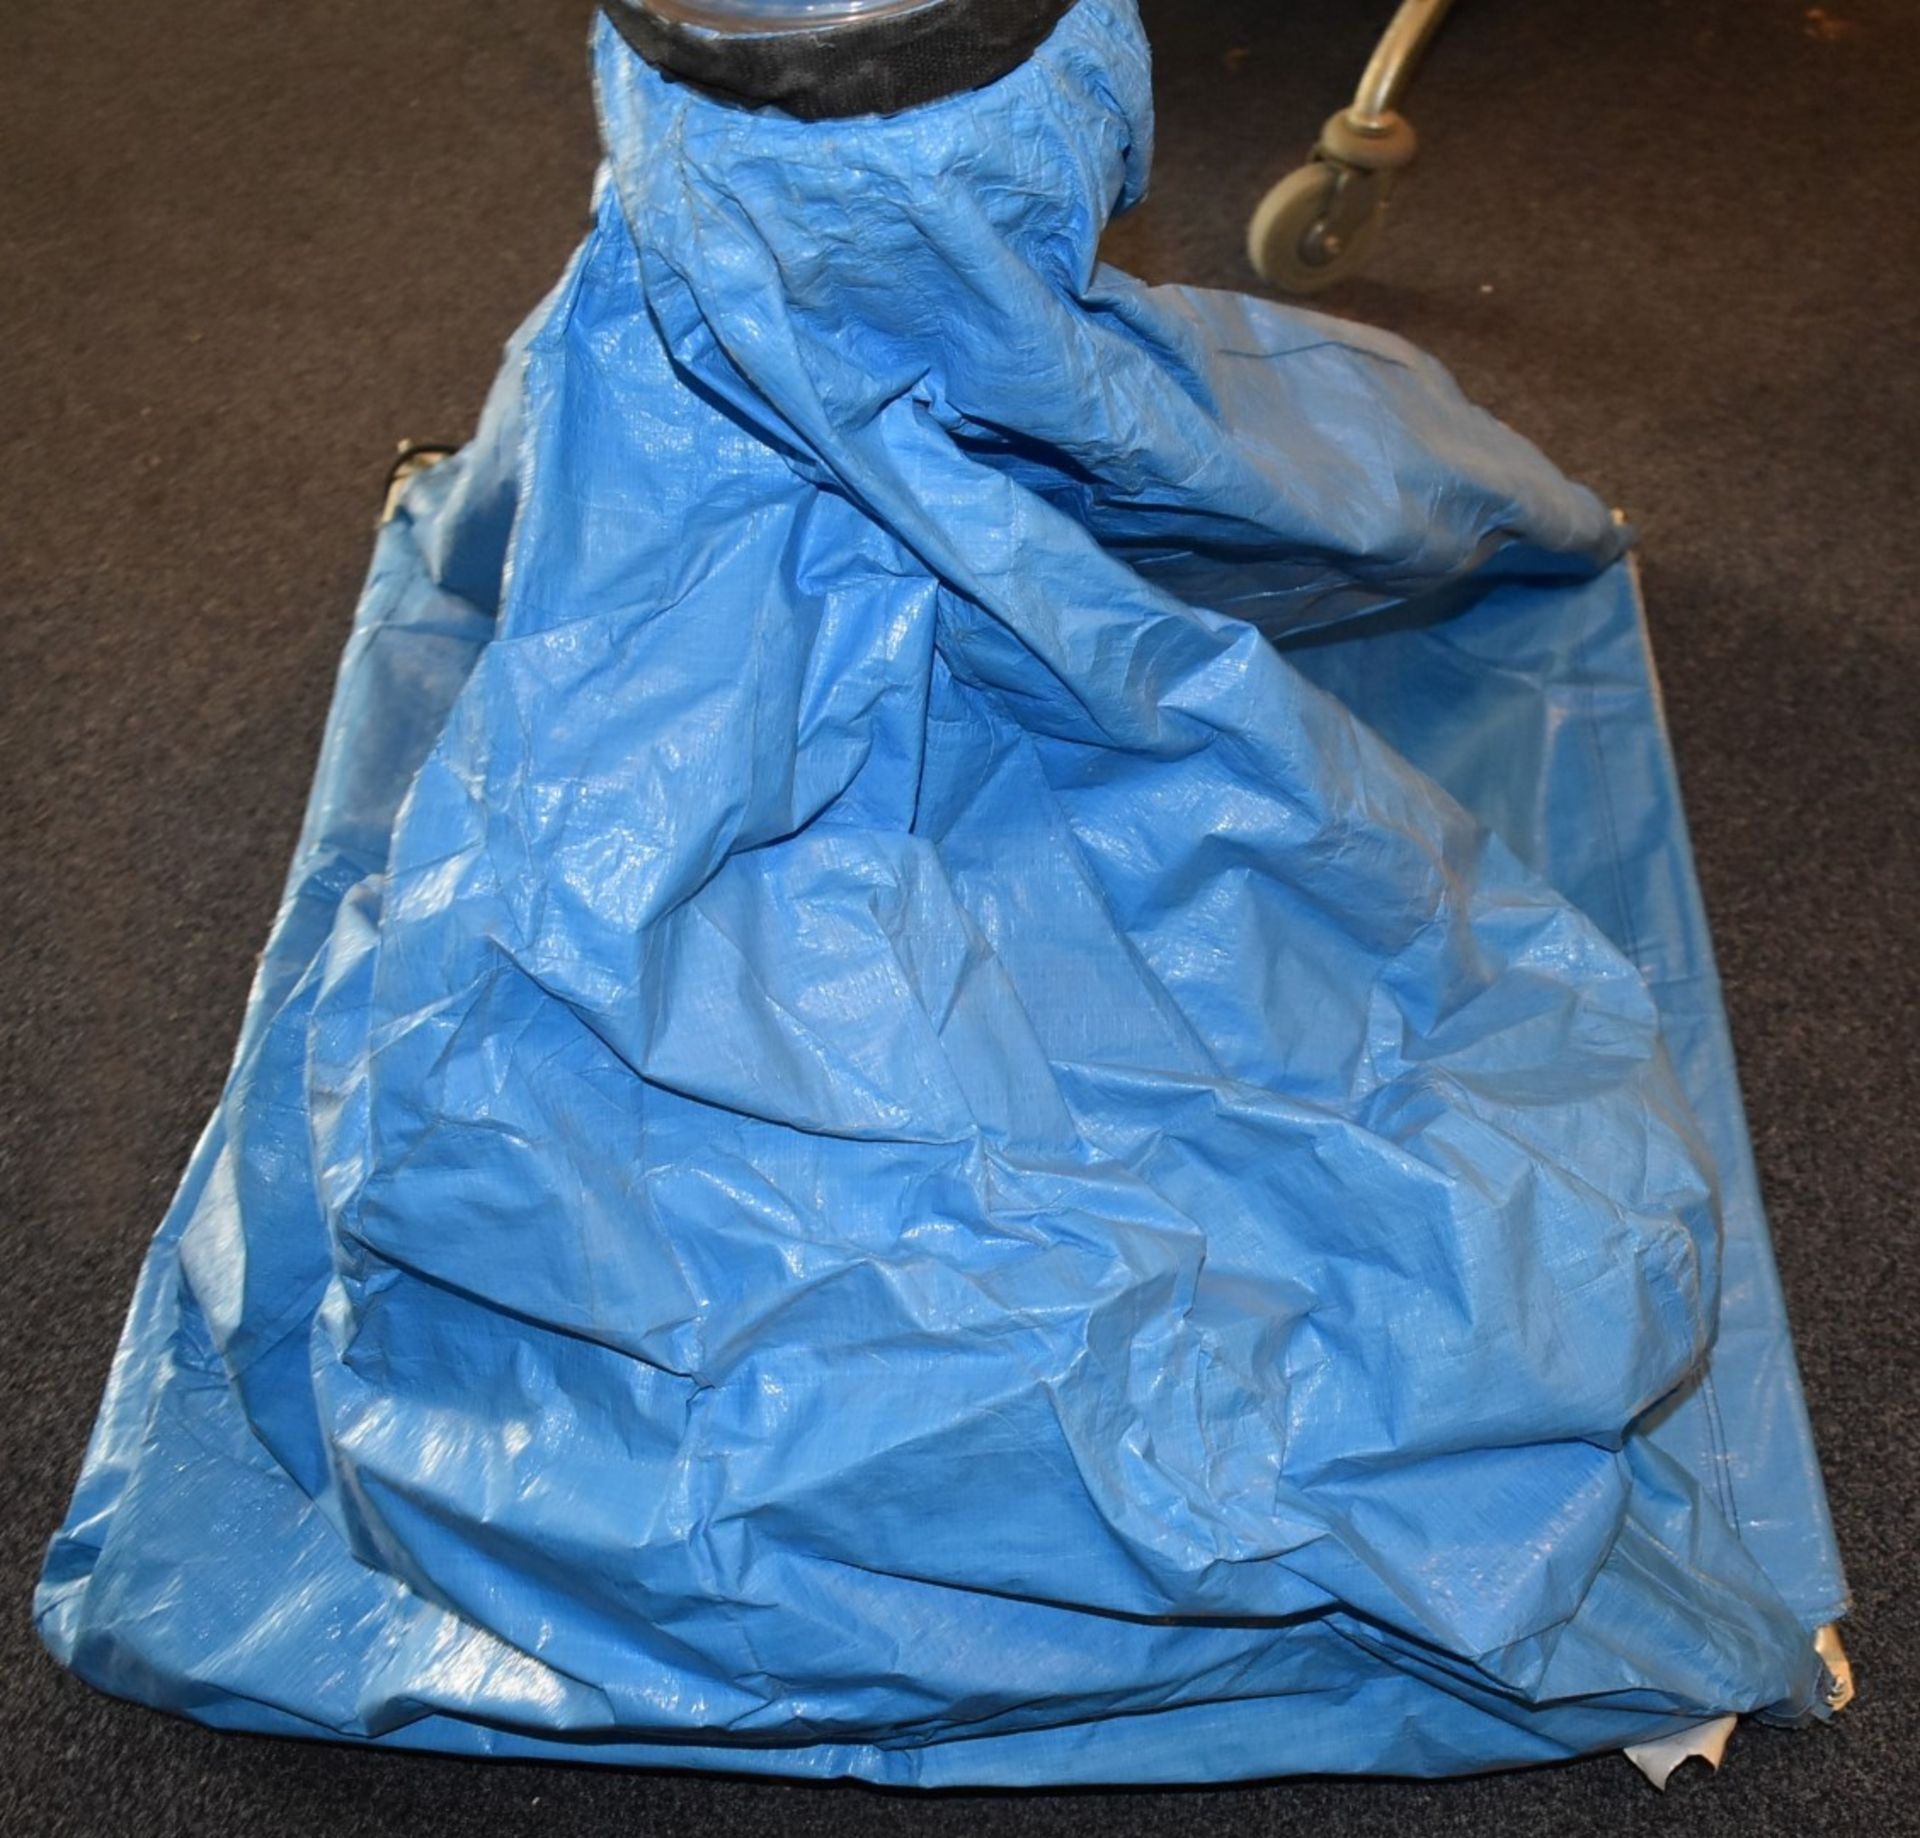 1 x Builders Waste Chute - Size: 100 x 100 cms – Ref: AC350 1FSR - CL646 - Location: Manchester, M12 - Image 5 of 5